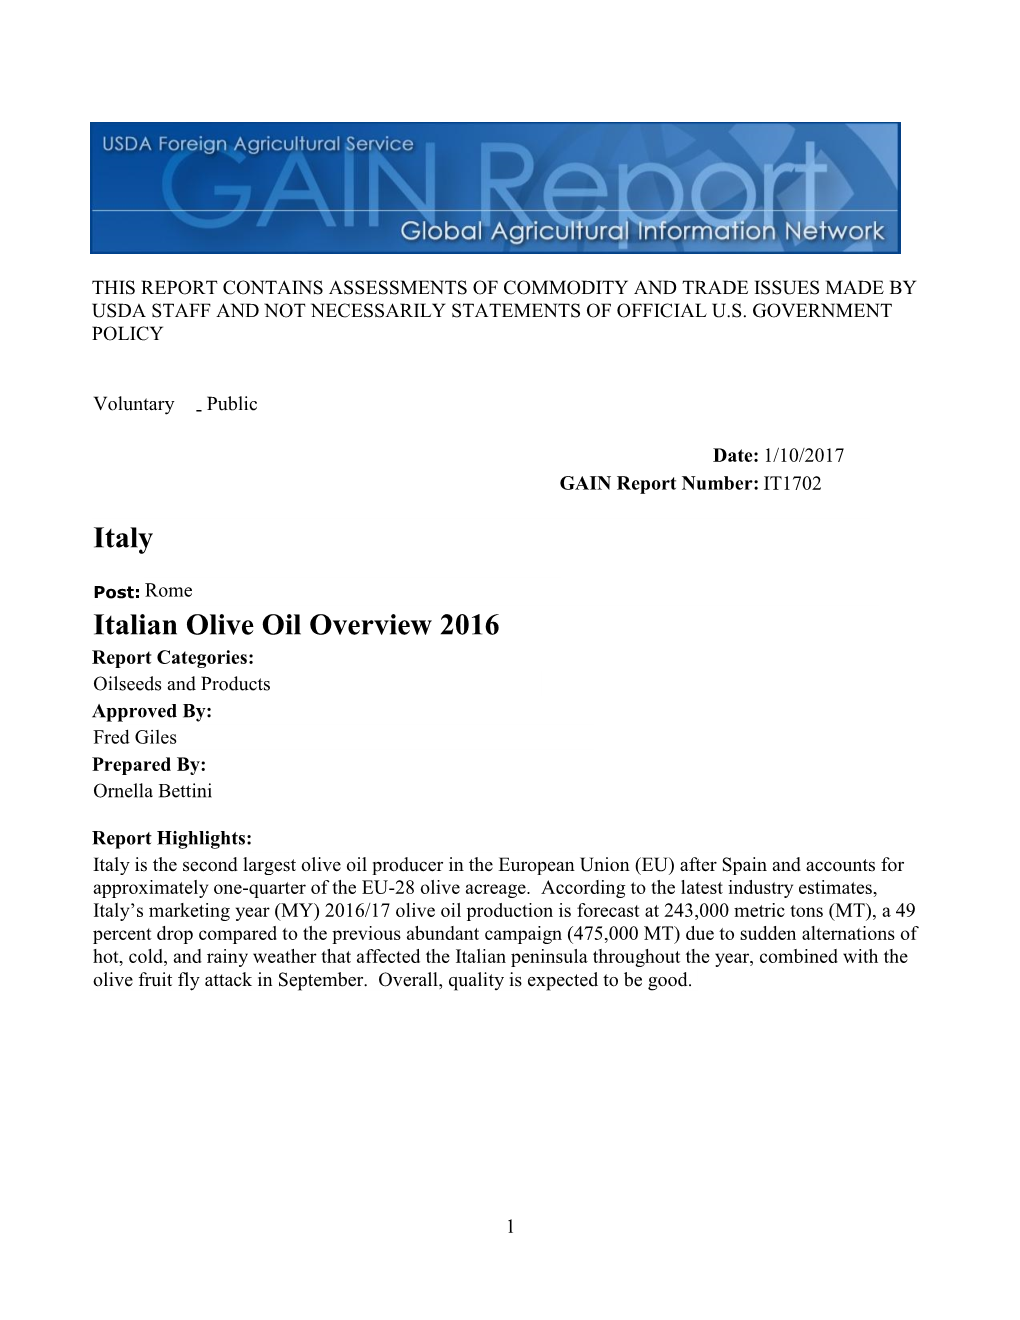 Italian Olive Oil Overview 2016 Report Categories: Oilseeds and Products Approved By: Fred Giles Prepared By: Ornella Bettini